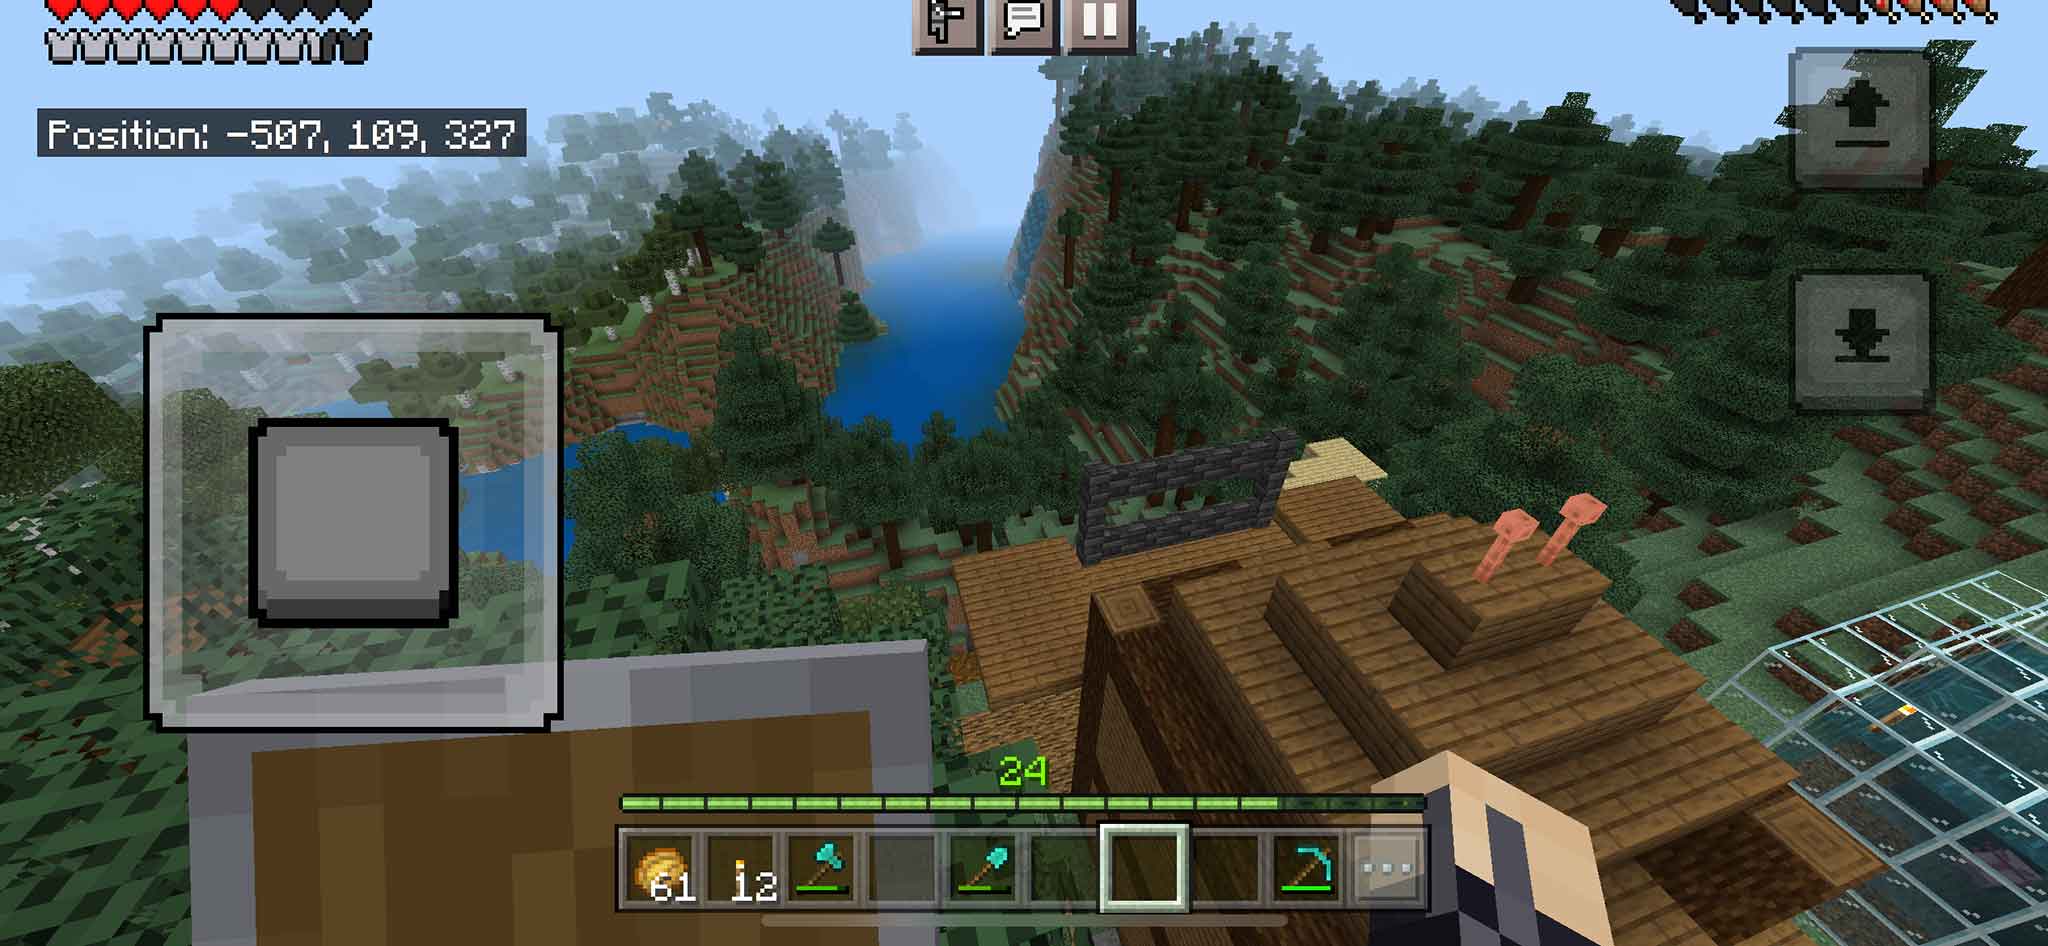 Step-by-Step Guide to Setting Up a Minecraft Server for Your Kids